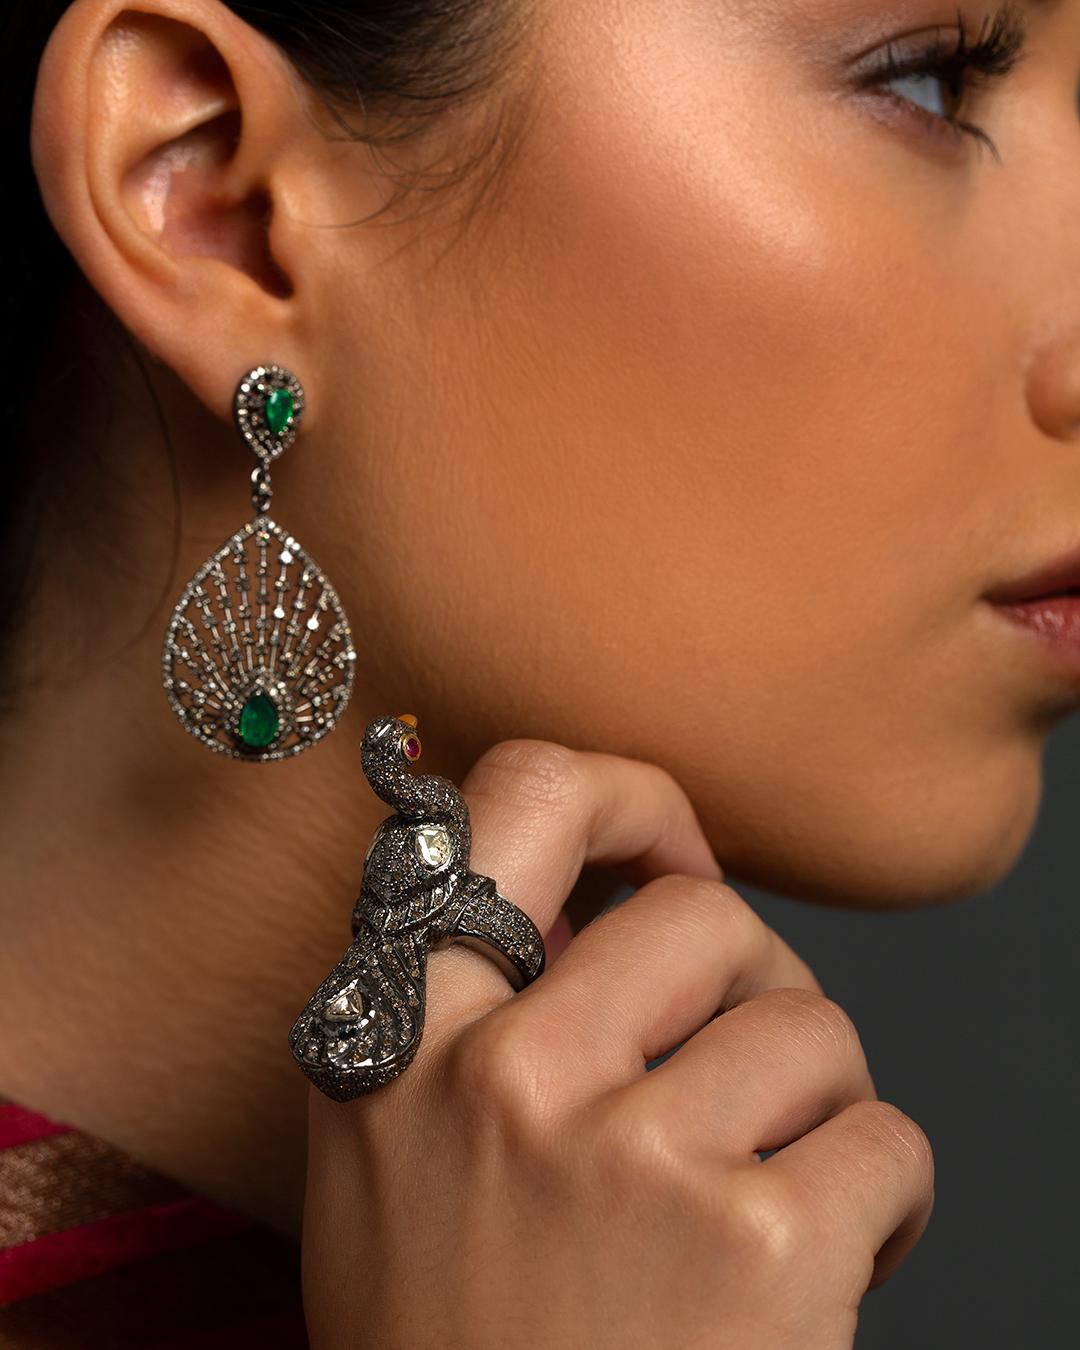 A statement piece, meticulously crafted in a stand proud peacock design. Set with natural diamond, single cut diamonds and rubies. Please note that there could be very slight variations in the piece as each piece is individually handmade.

Peacocks